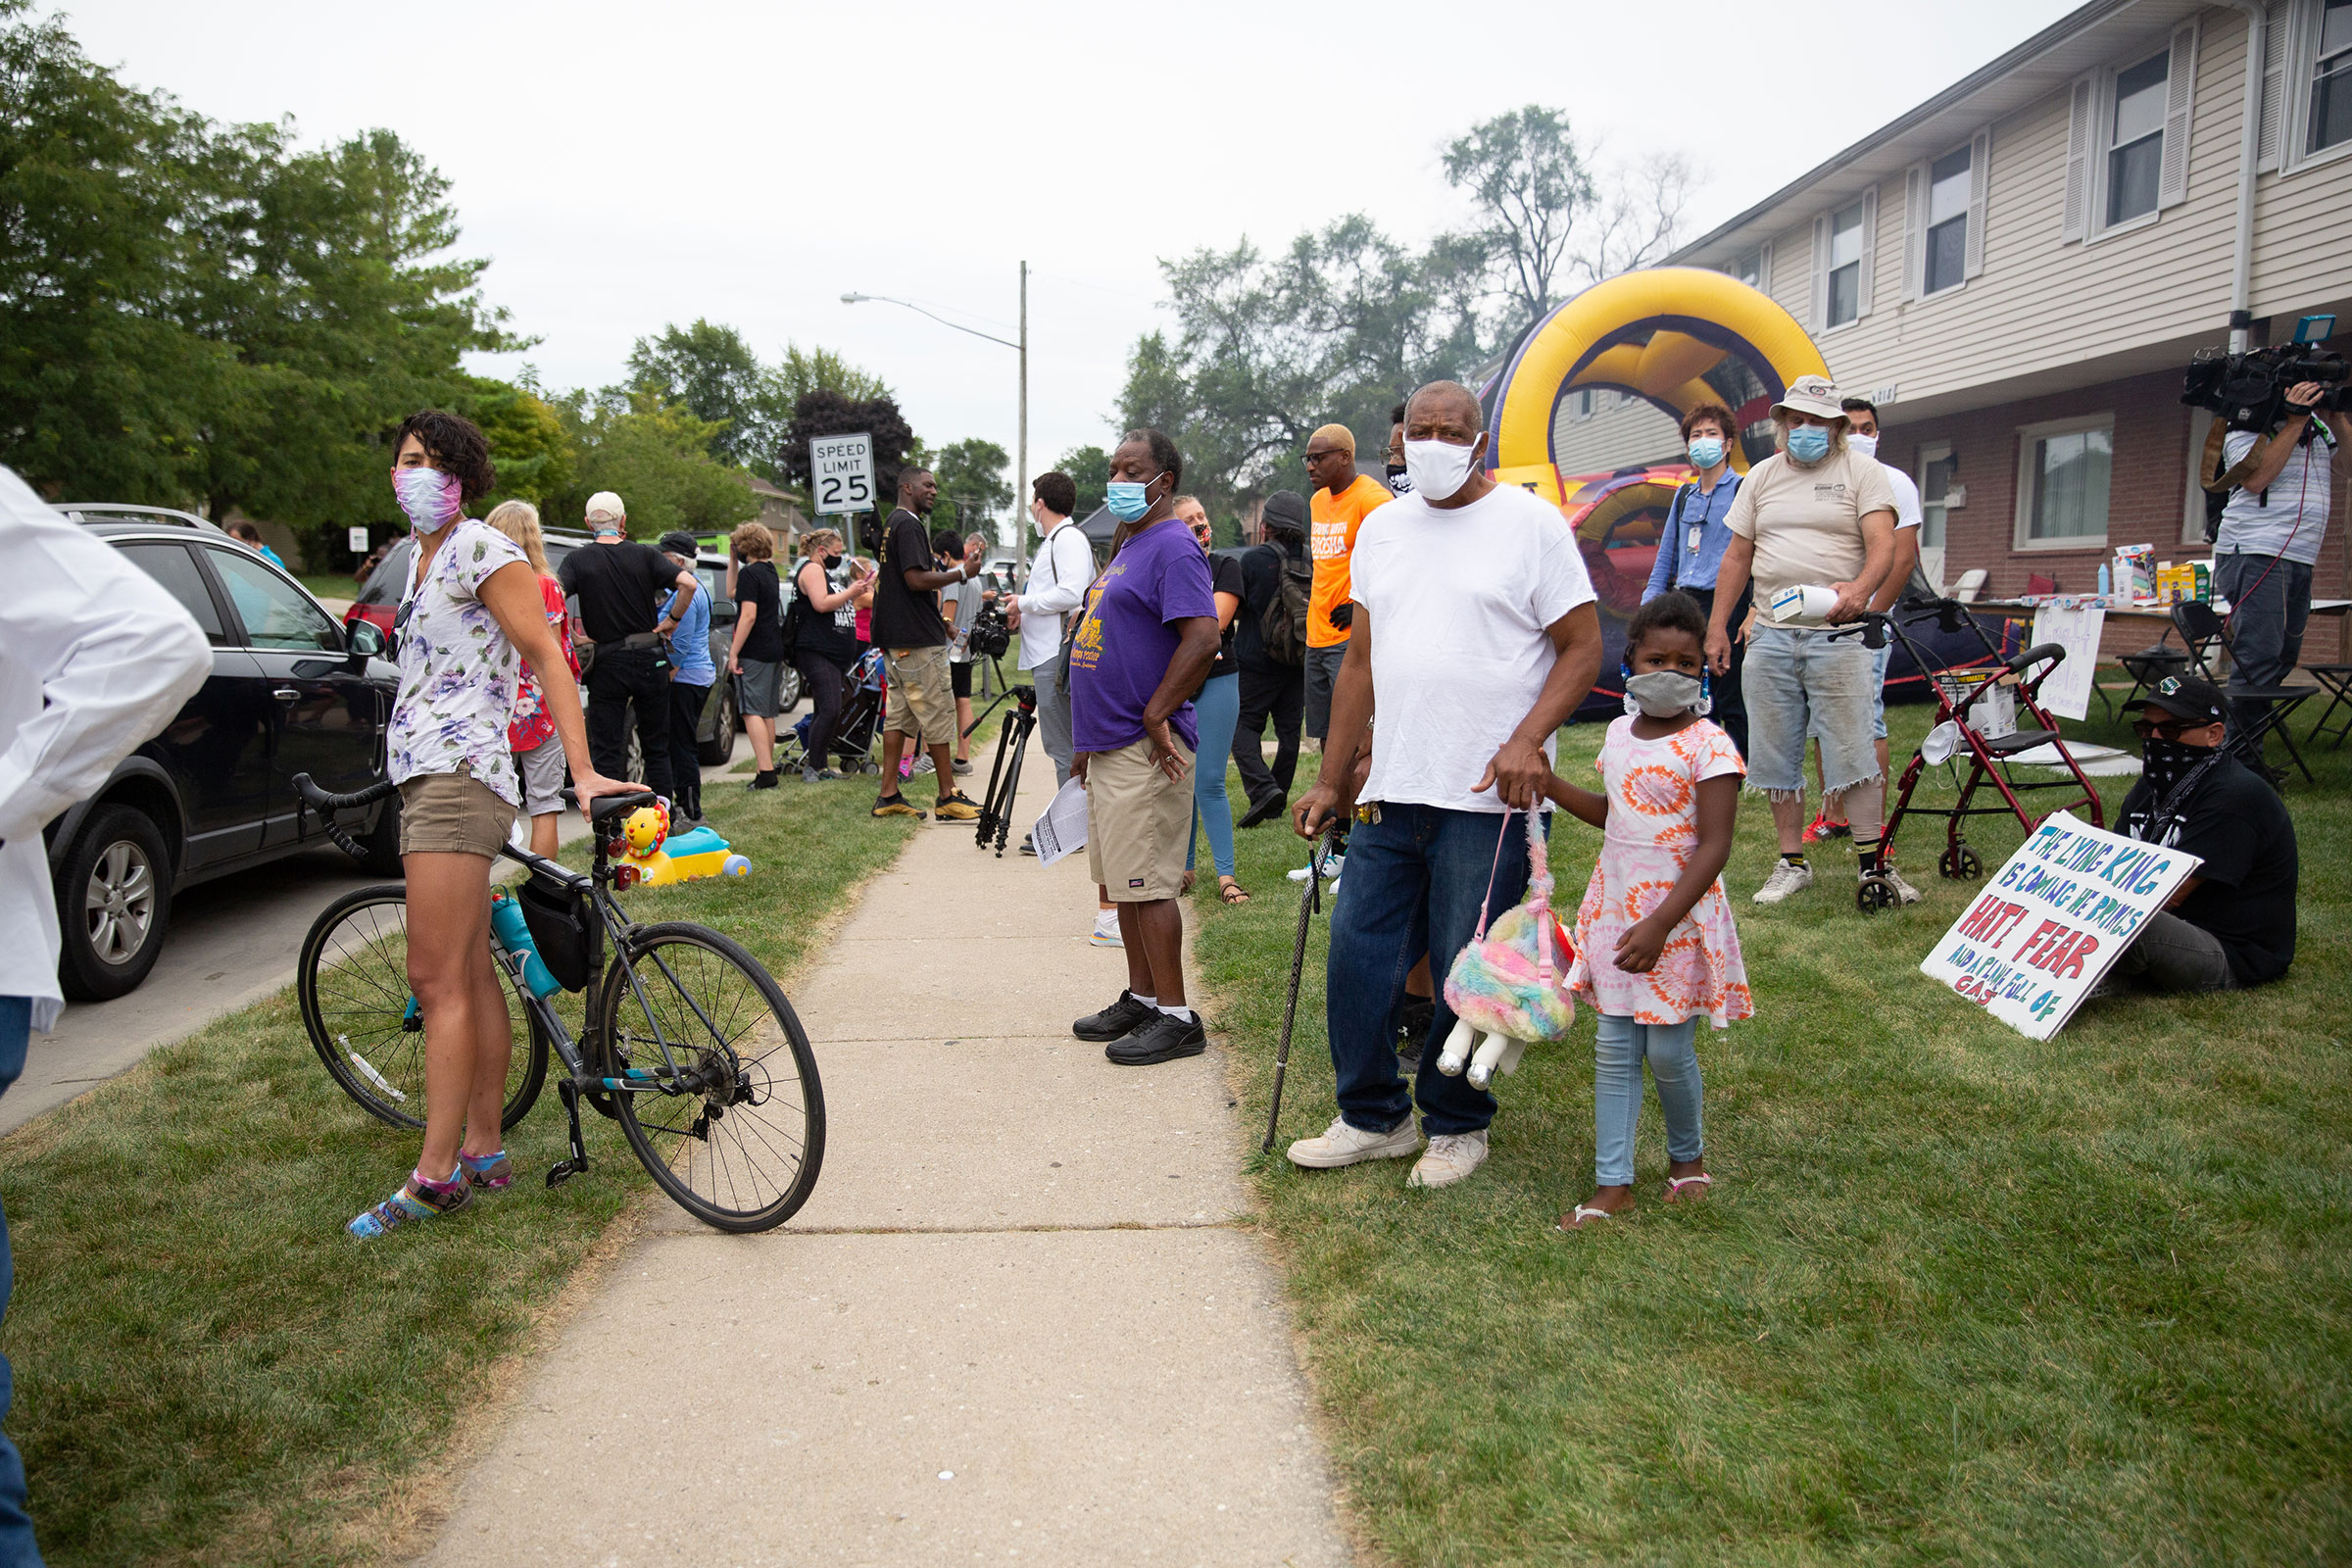 A peaceful gathering early Tuesday near the site where Jacob Blake was shot by police in Kenosha, Wis., on Sept. 1, 2020. (Patience Zalanga for TIME)